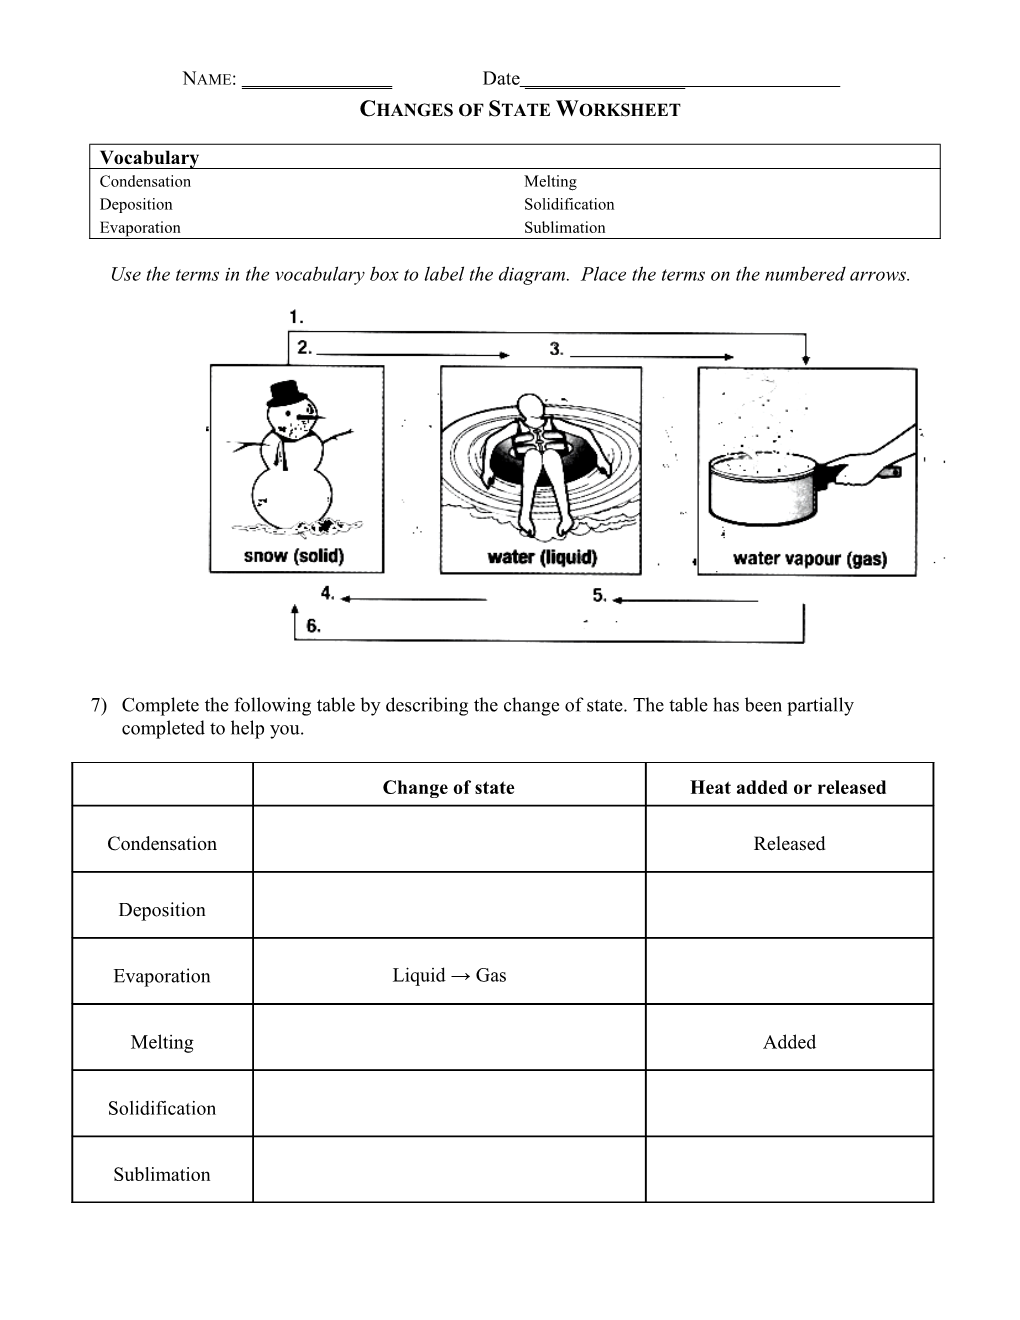 Changes of State Worksheet